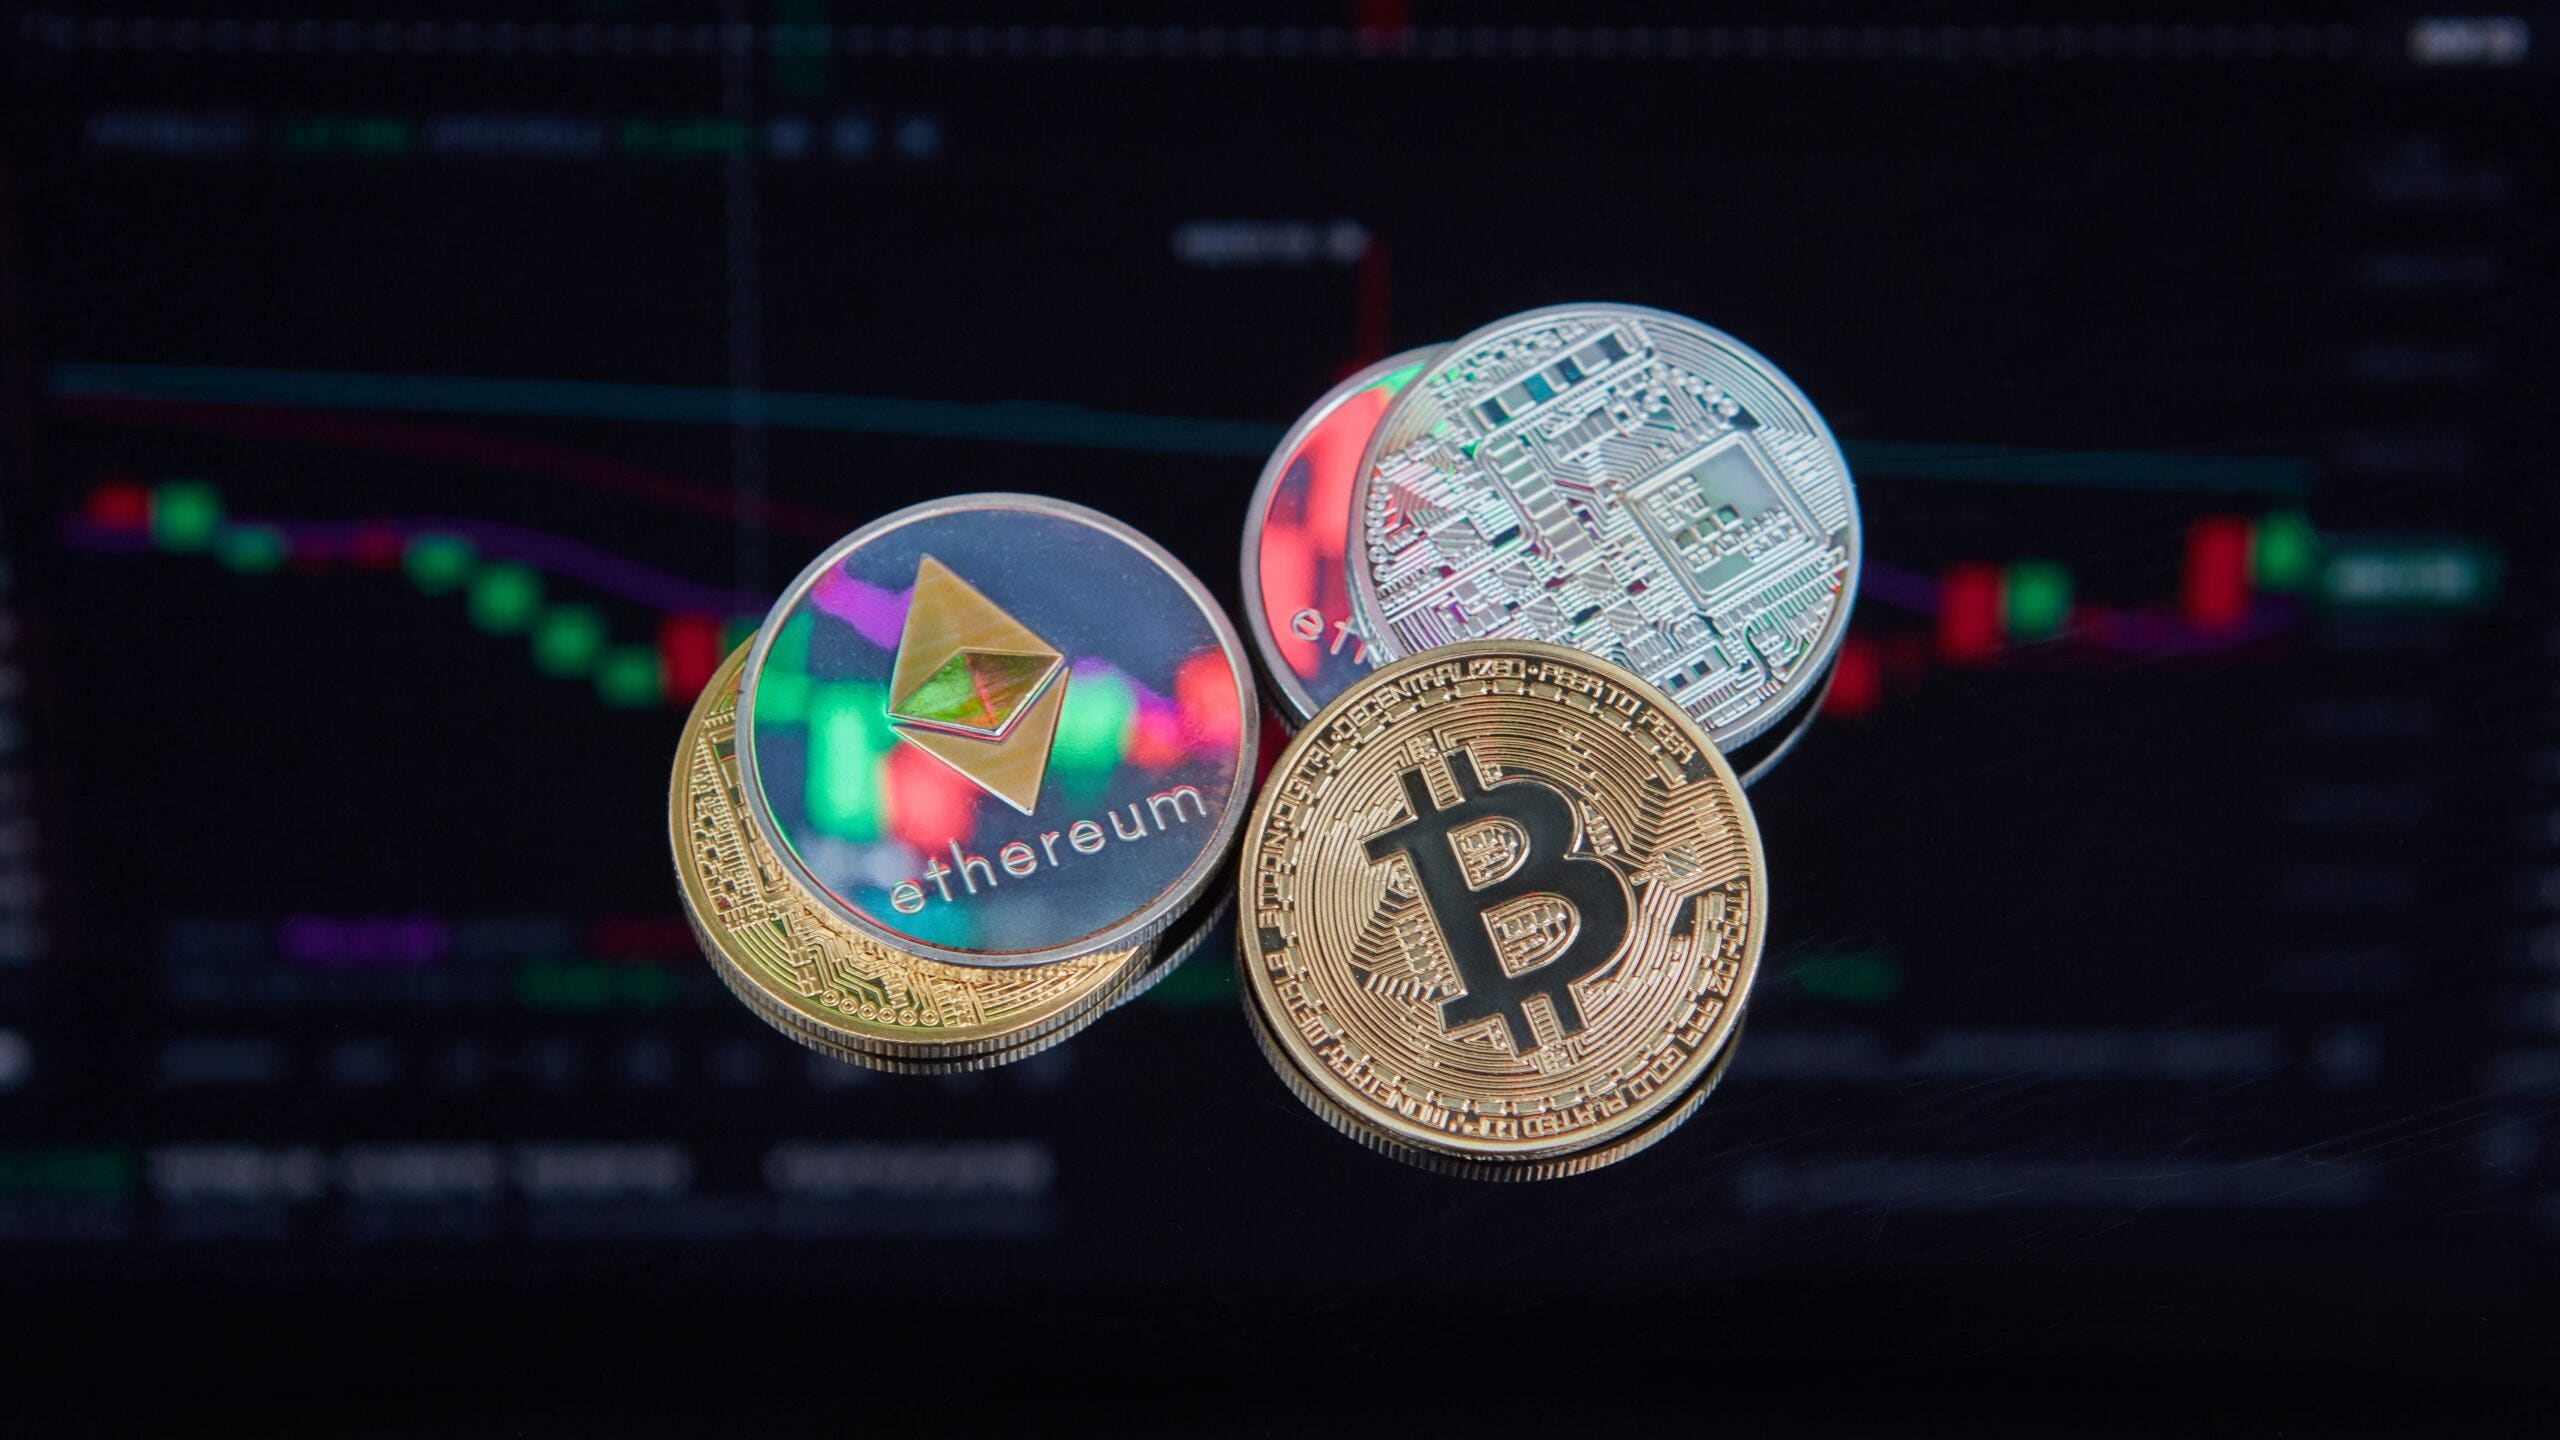 How to buy cryptocurrency: A guide for investors